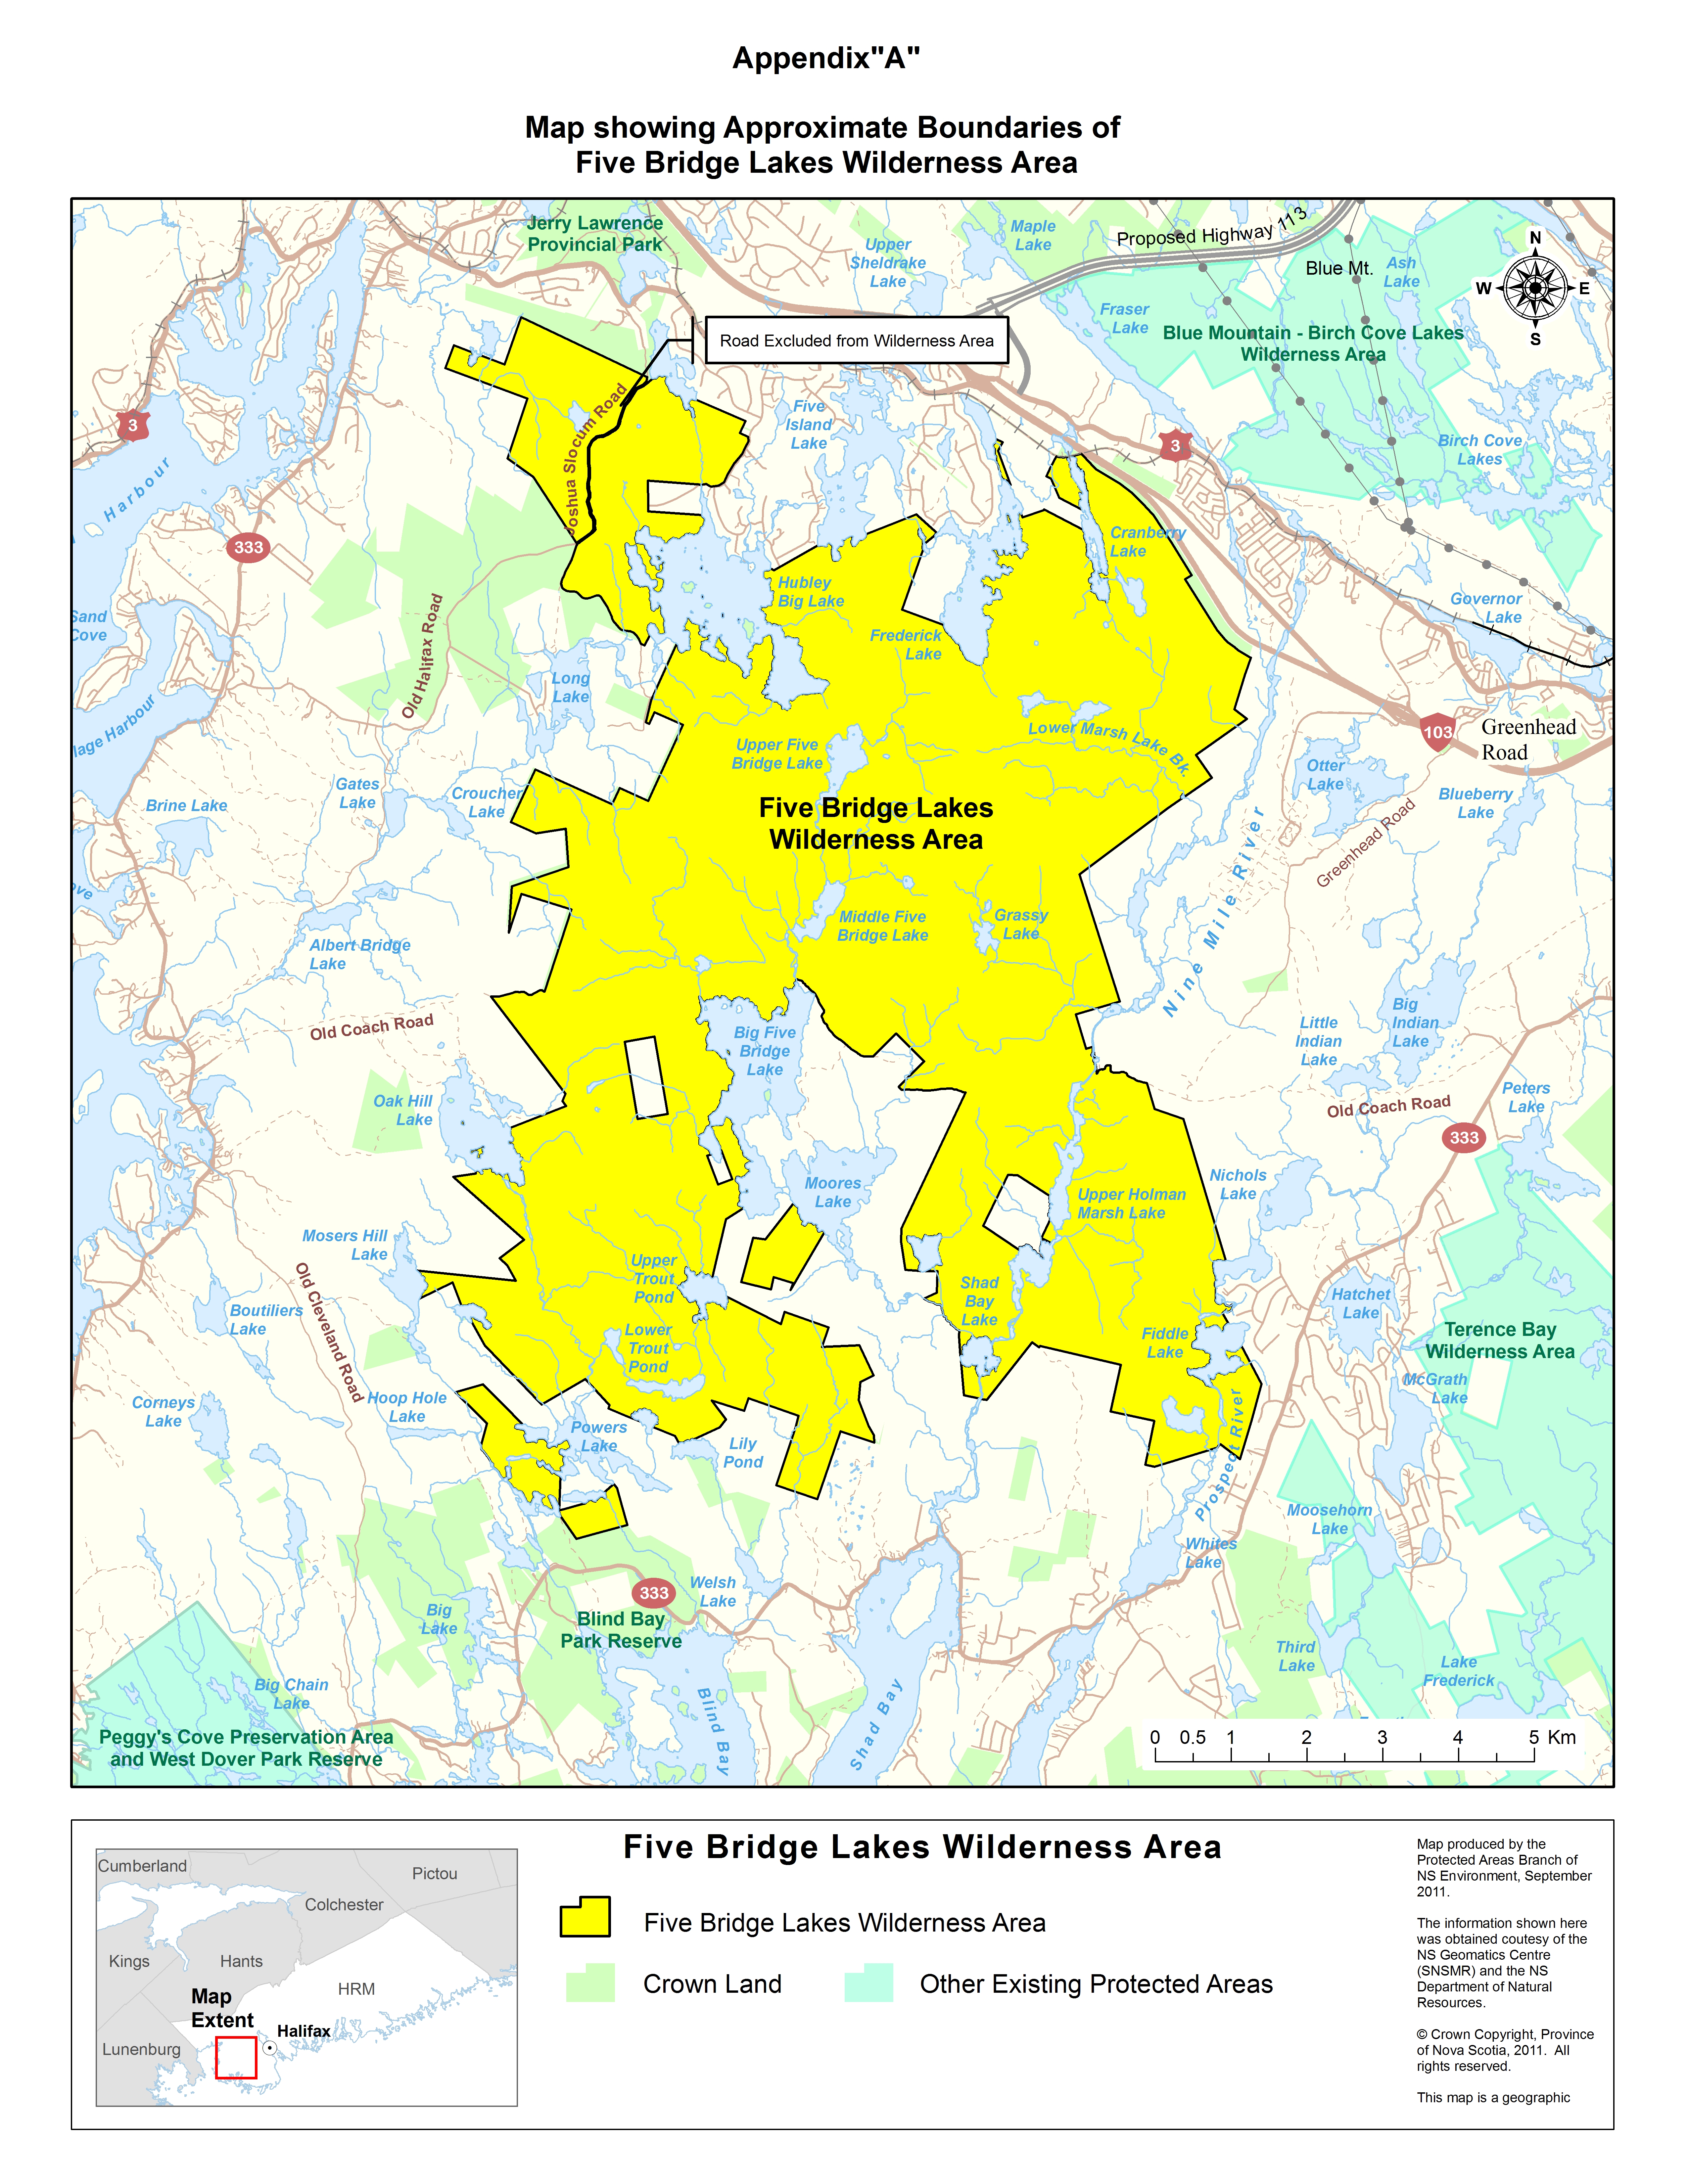 Map showing approximate boundaries of Five Bridge Lakes Wilderness Area